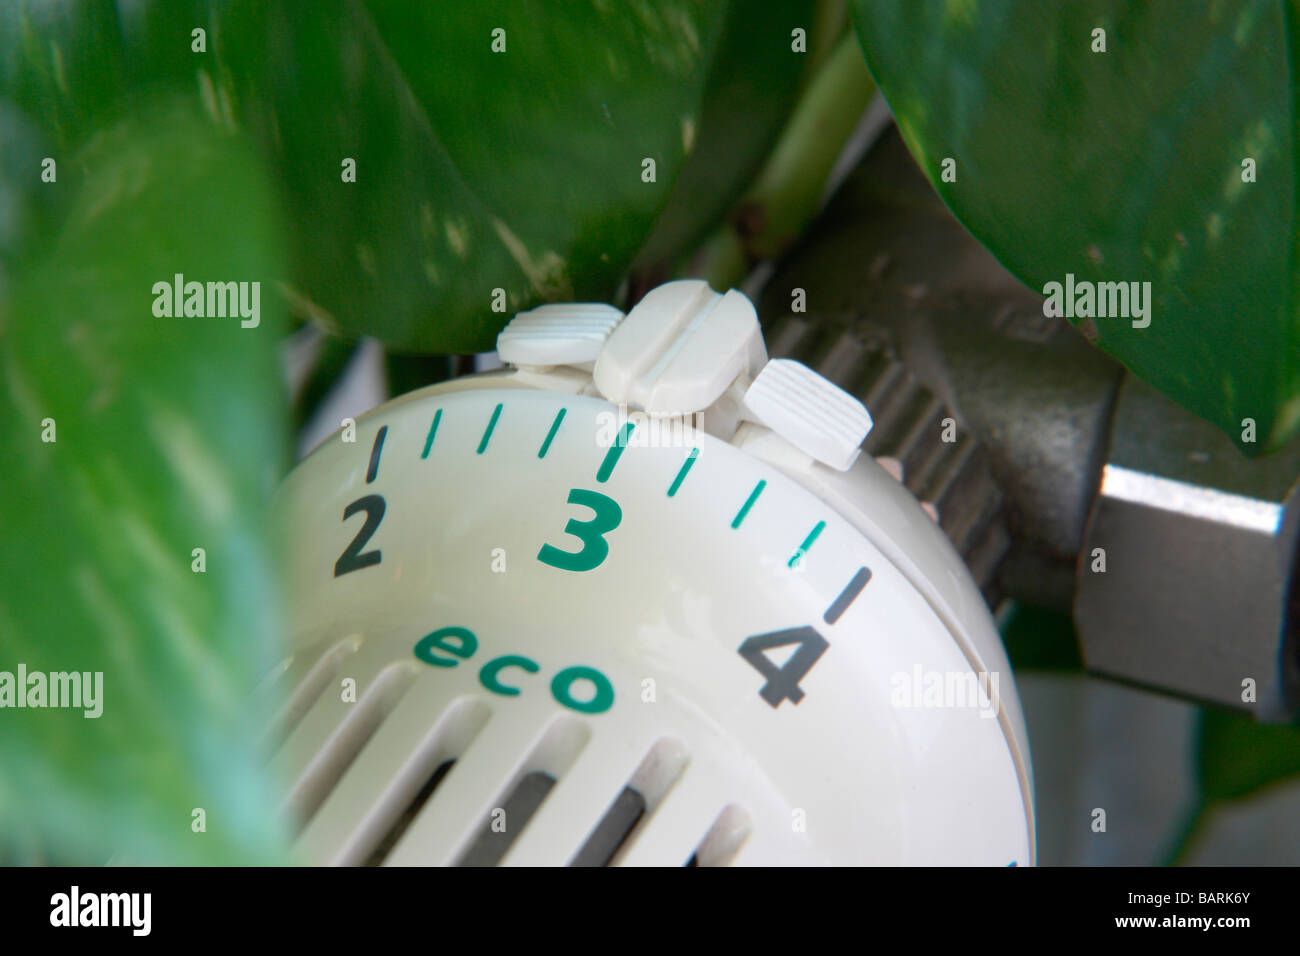 Thermostatic radiator valve (detail) surrounded by green leaves of a plant. Stock Photo